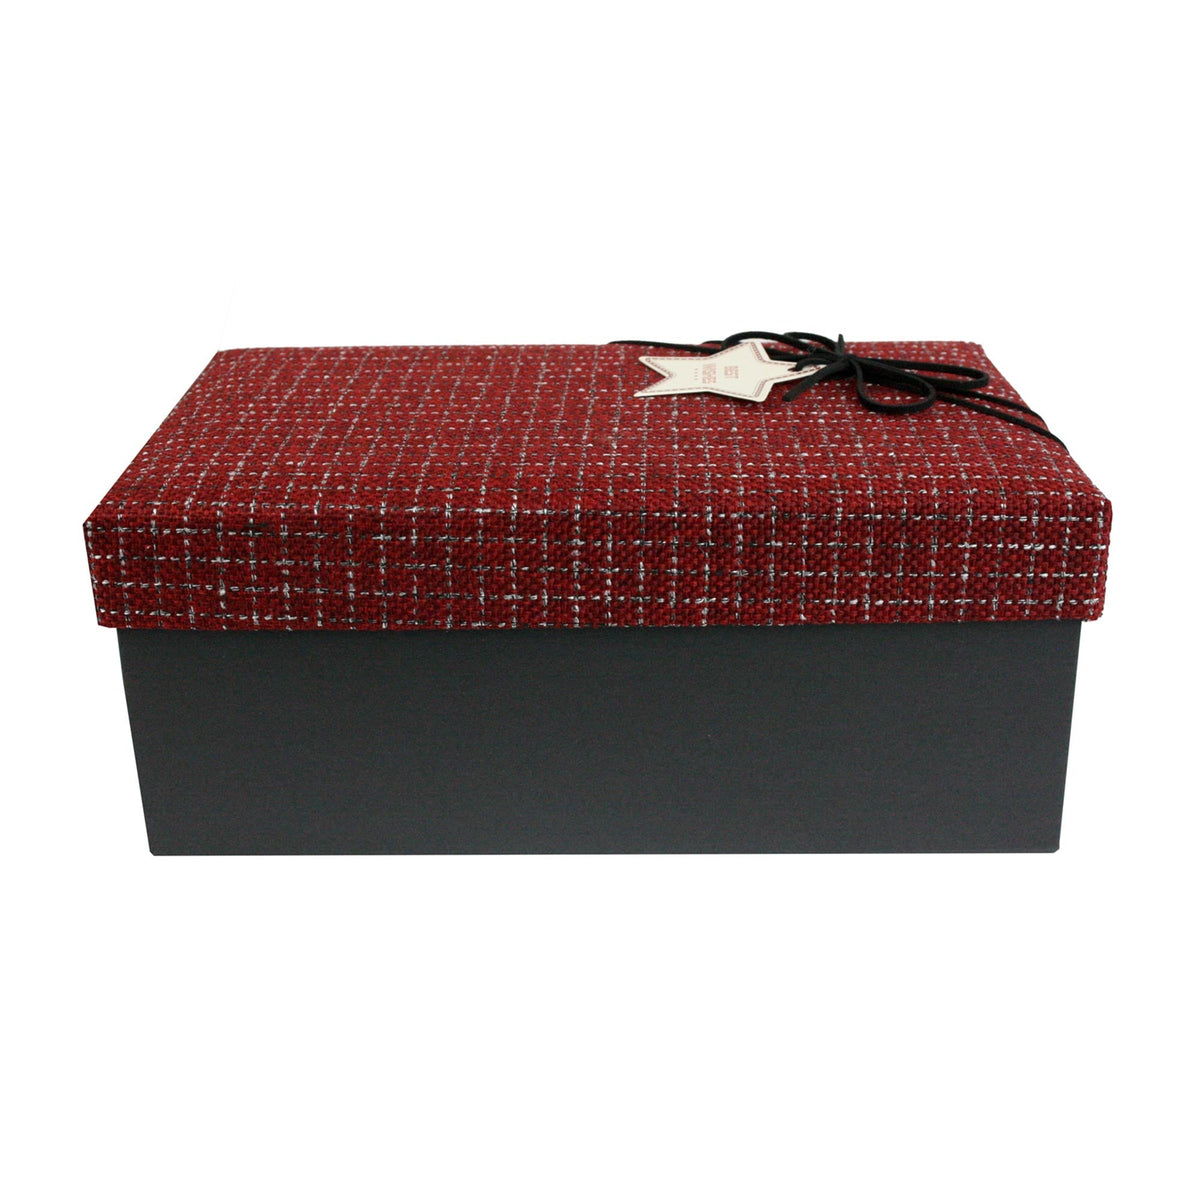 Single Black with Suede Decorative Ribbon Gift Box (Sizes Available)